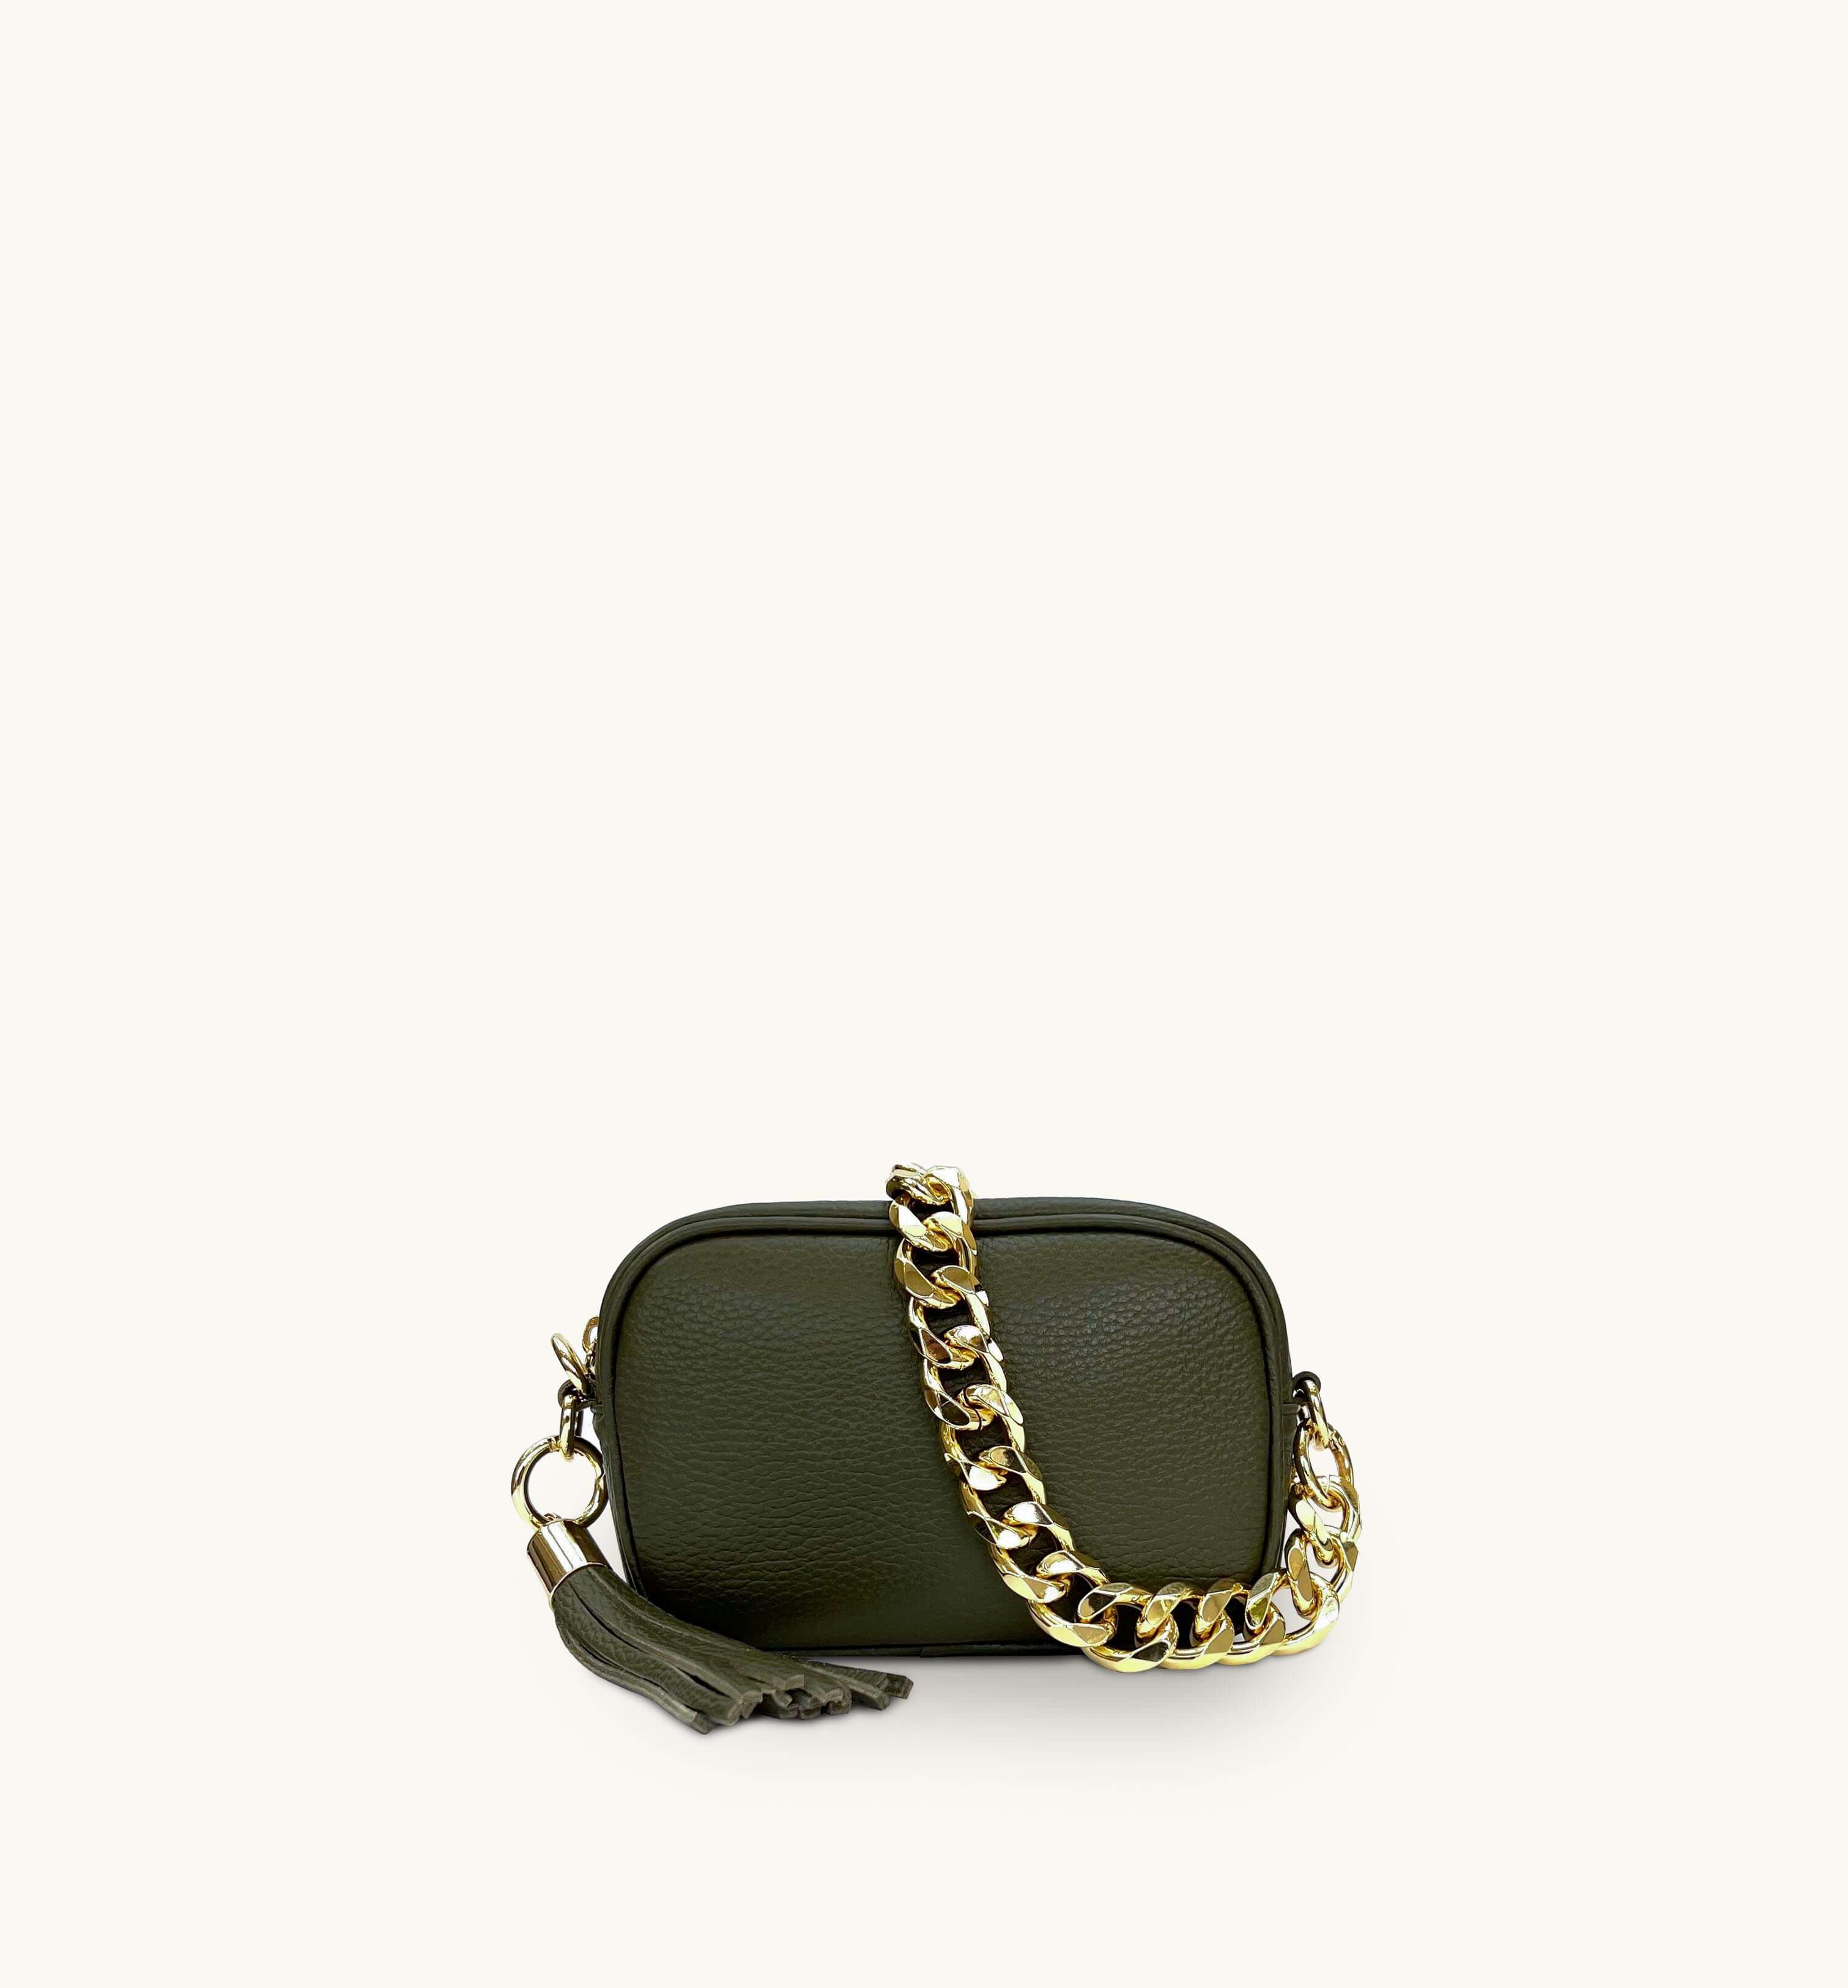 Apatchy Mini Olive Green Leather Phone Bag With Gold Chain Strap